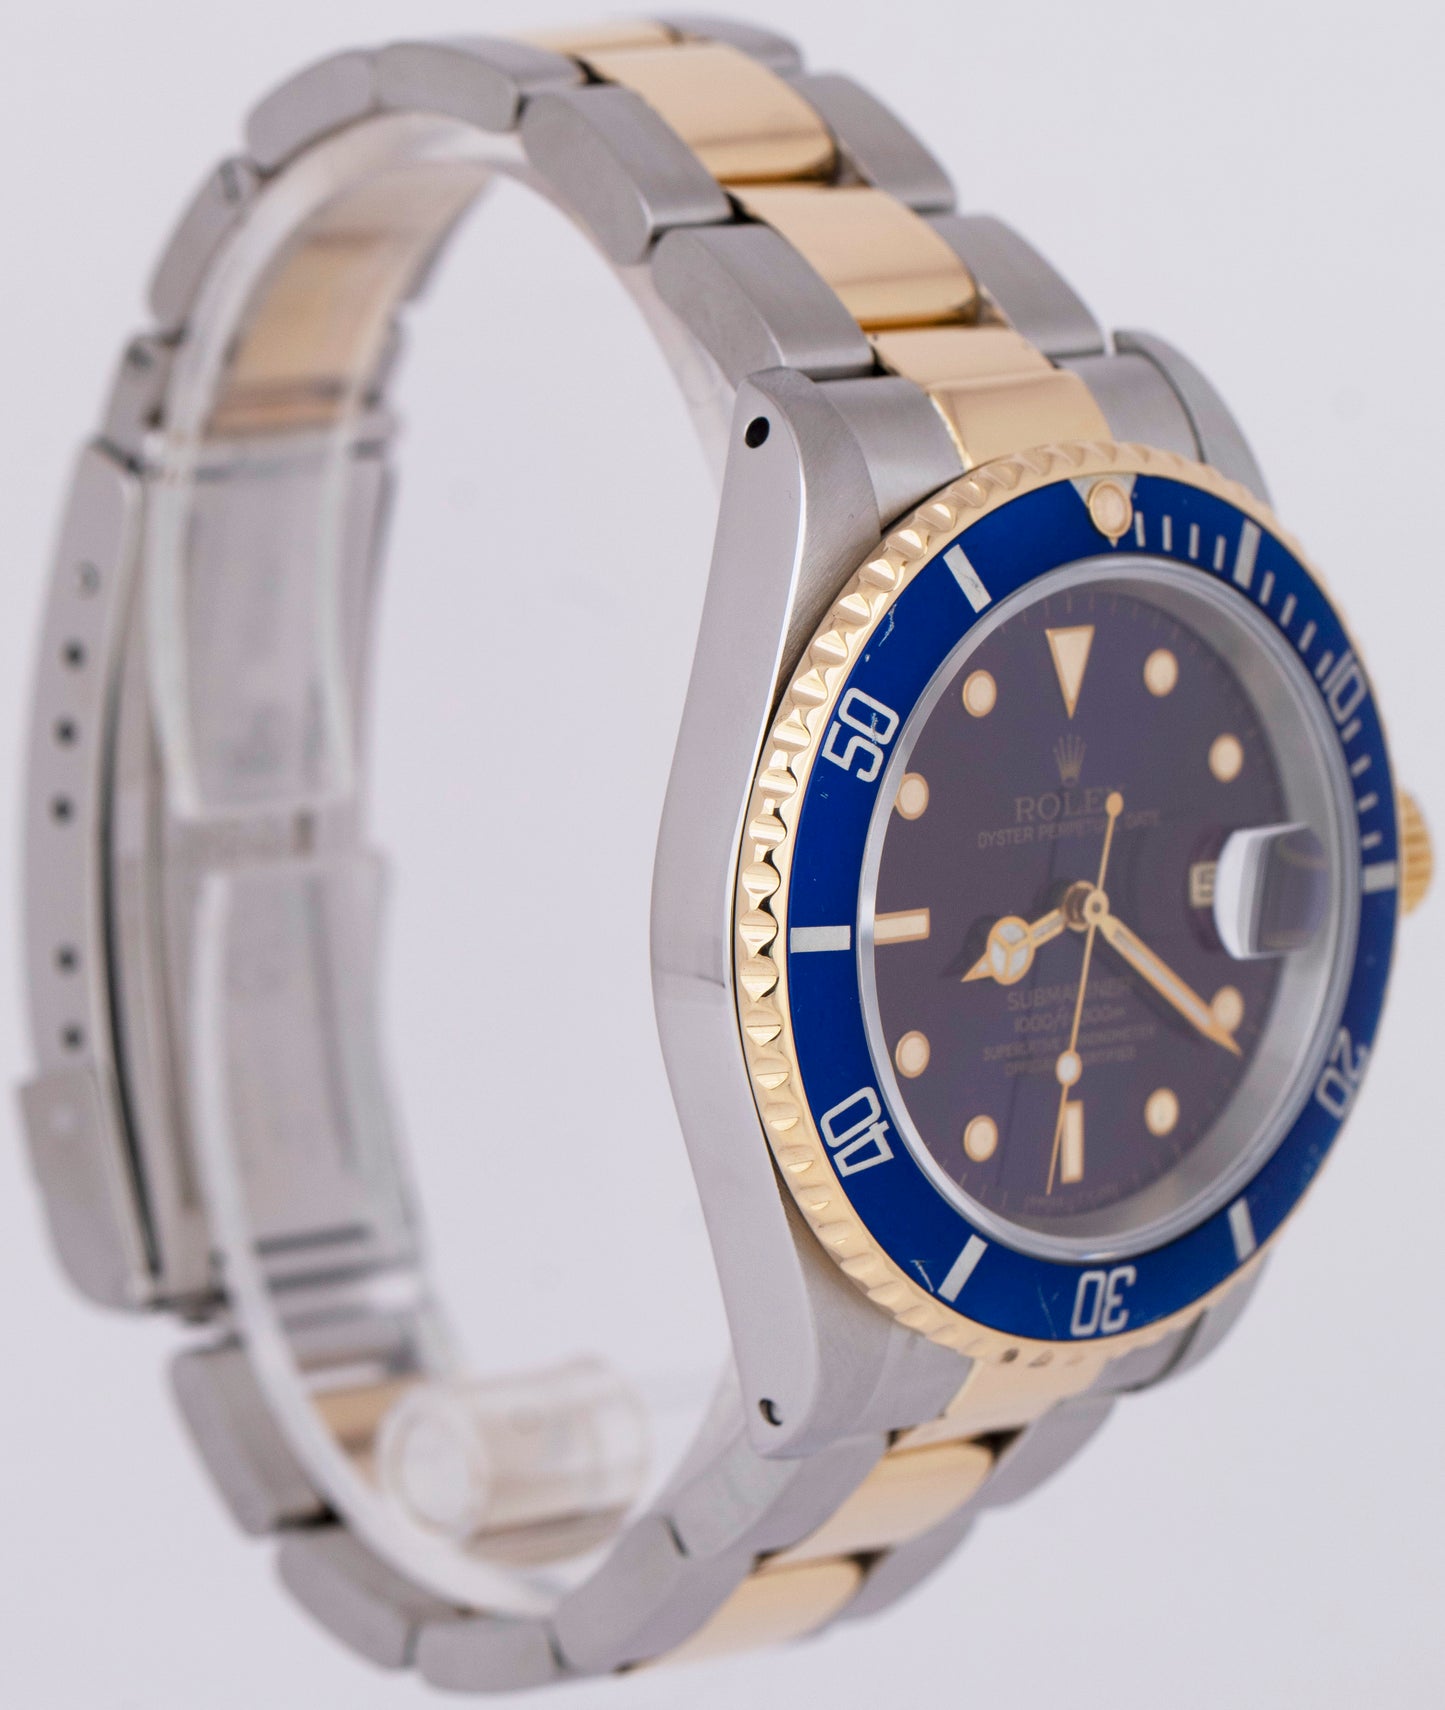 1990 PAPERS Rolex Submariner Date Two-Tone 18K Gold Blue 40mm Watch 16613 B+P